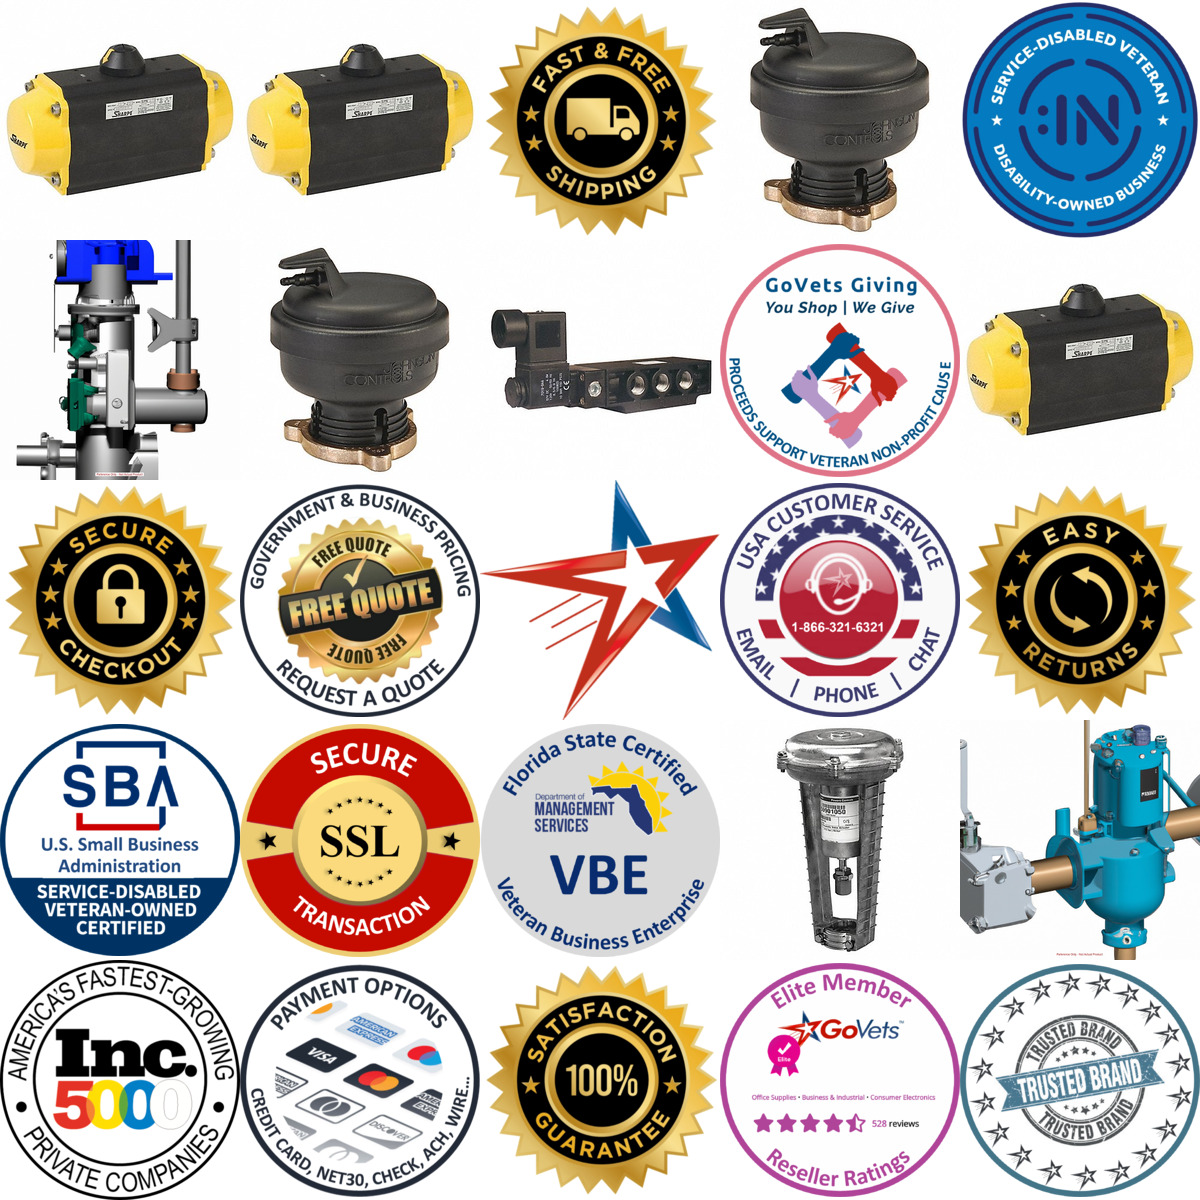 A selection of Pneumatic Actuators products on GoVets